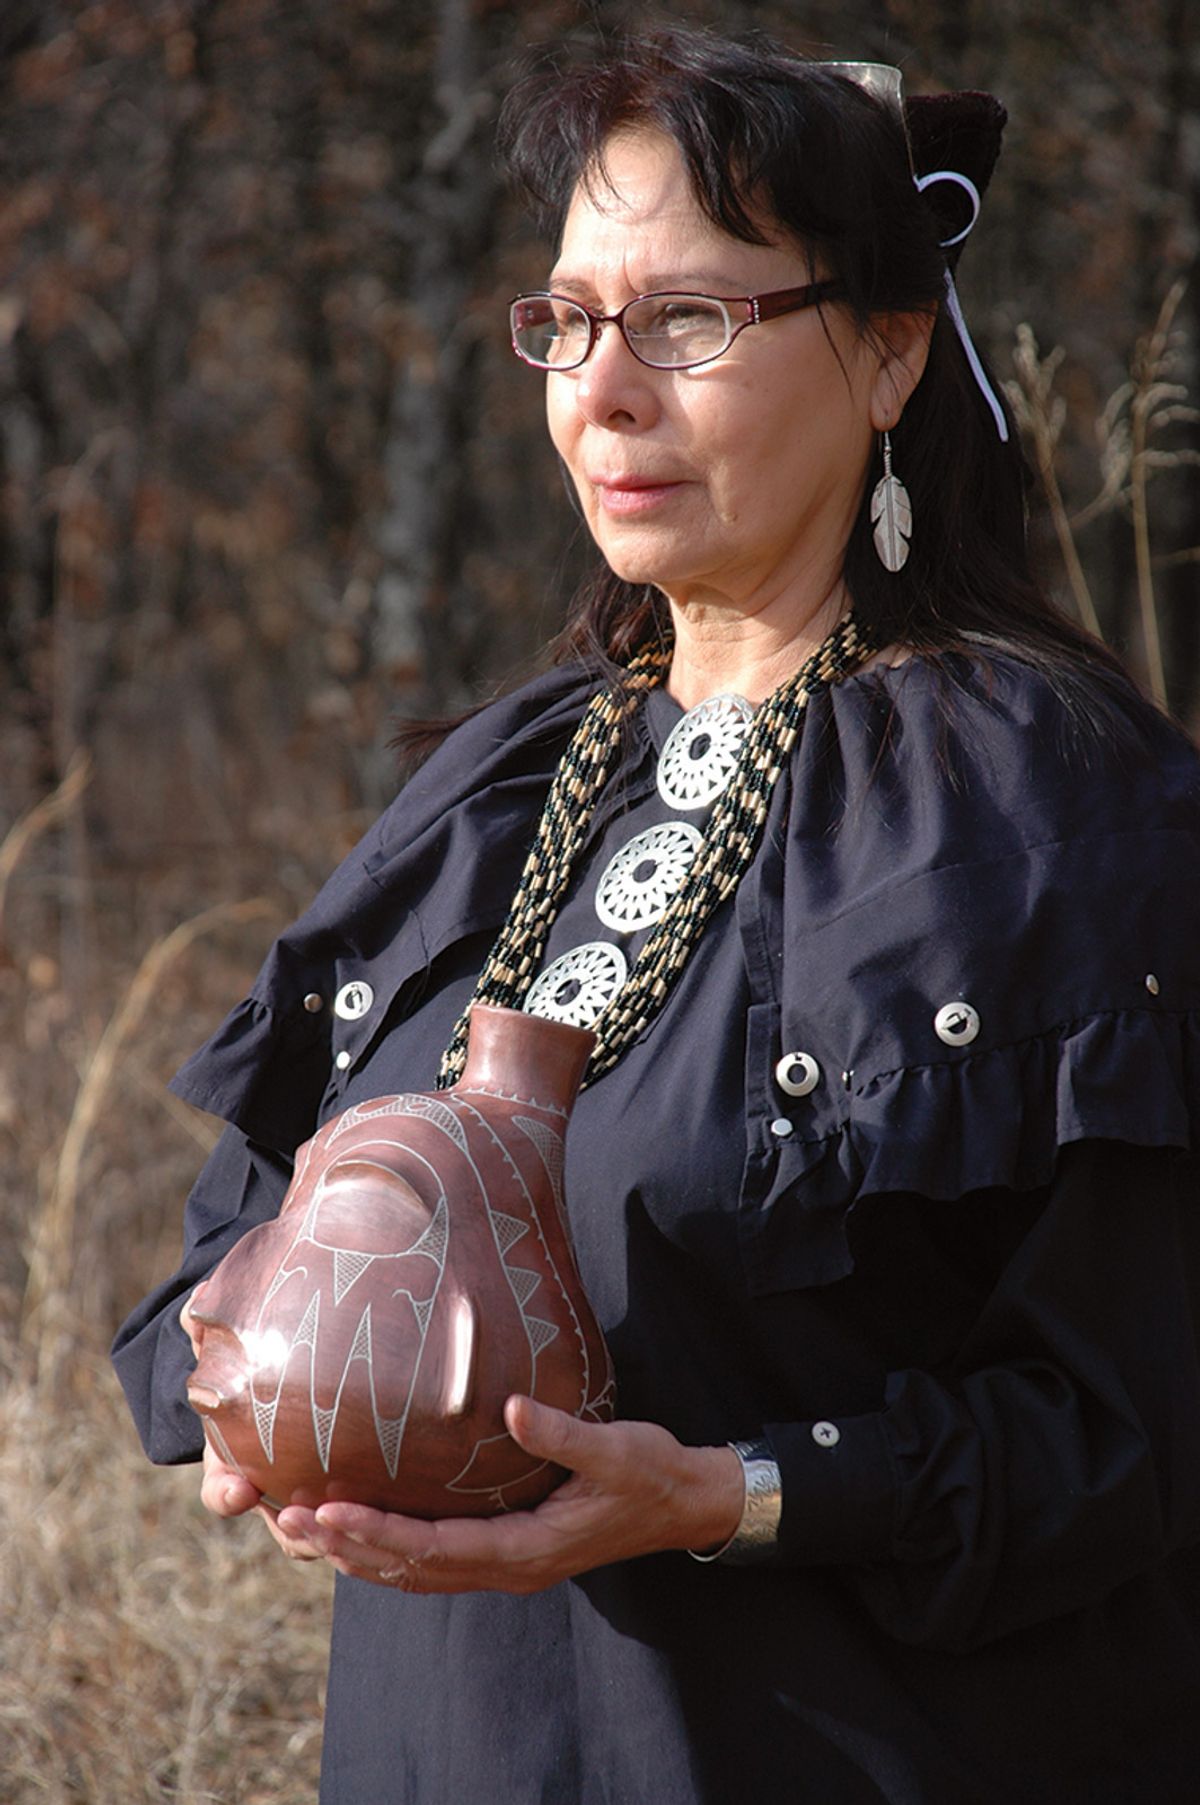 Native American artist Jeri Redcorn will show an installation evoking the lost art of Caddo ceramics at the museum Courtesy of Jeri Redcorn